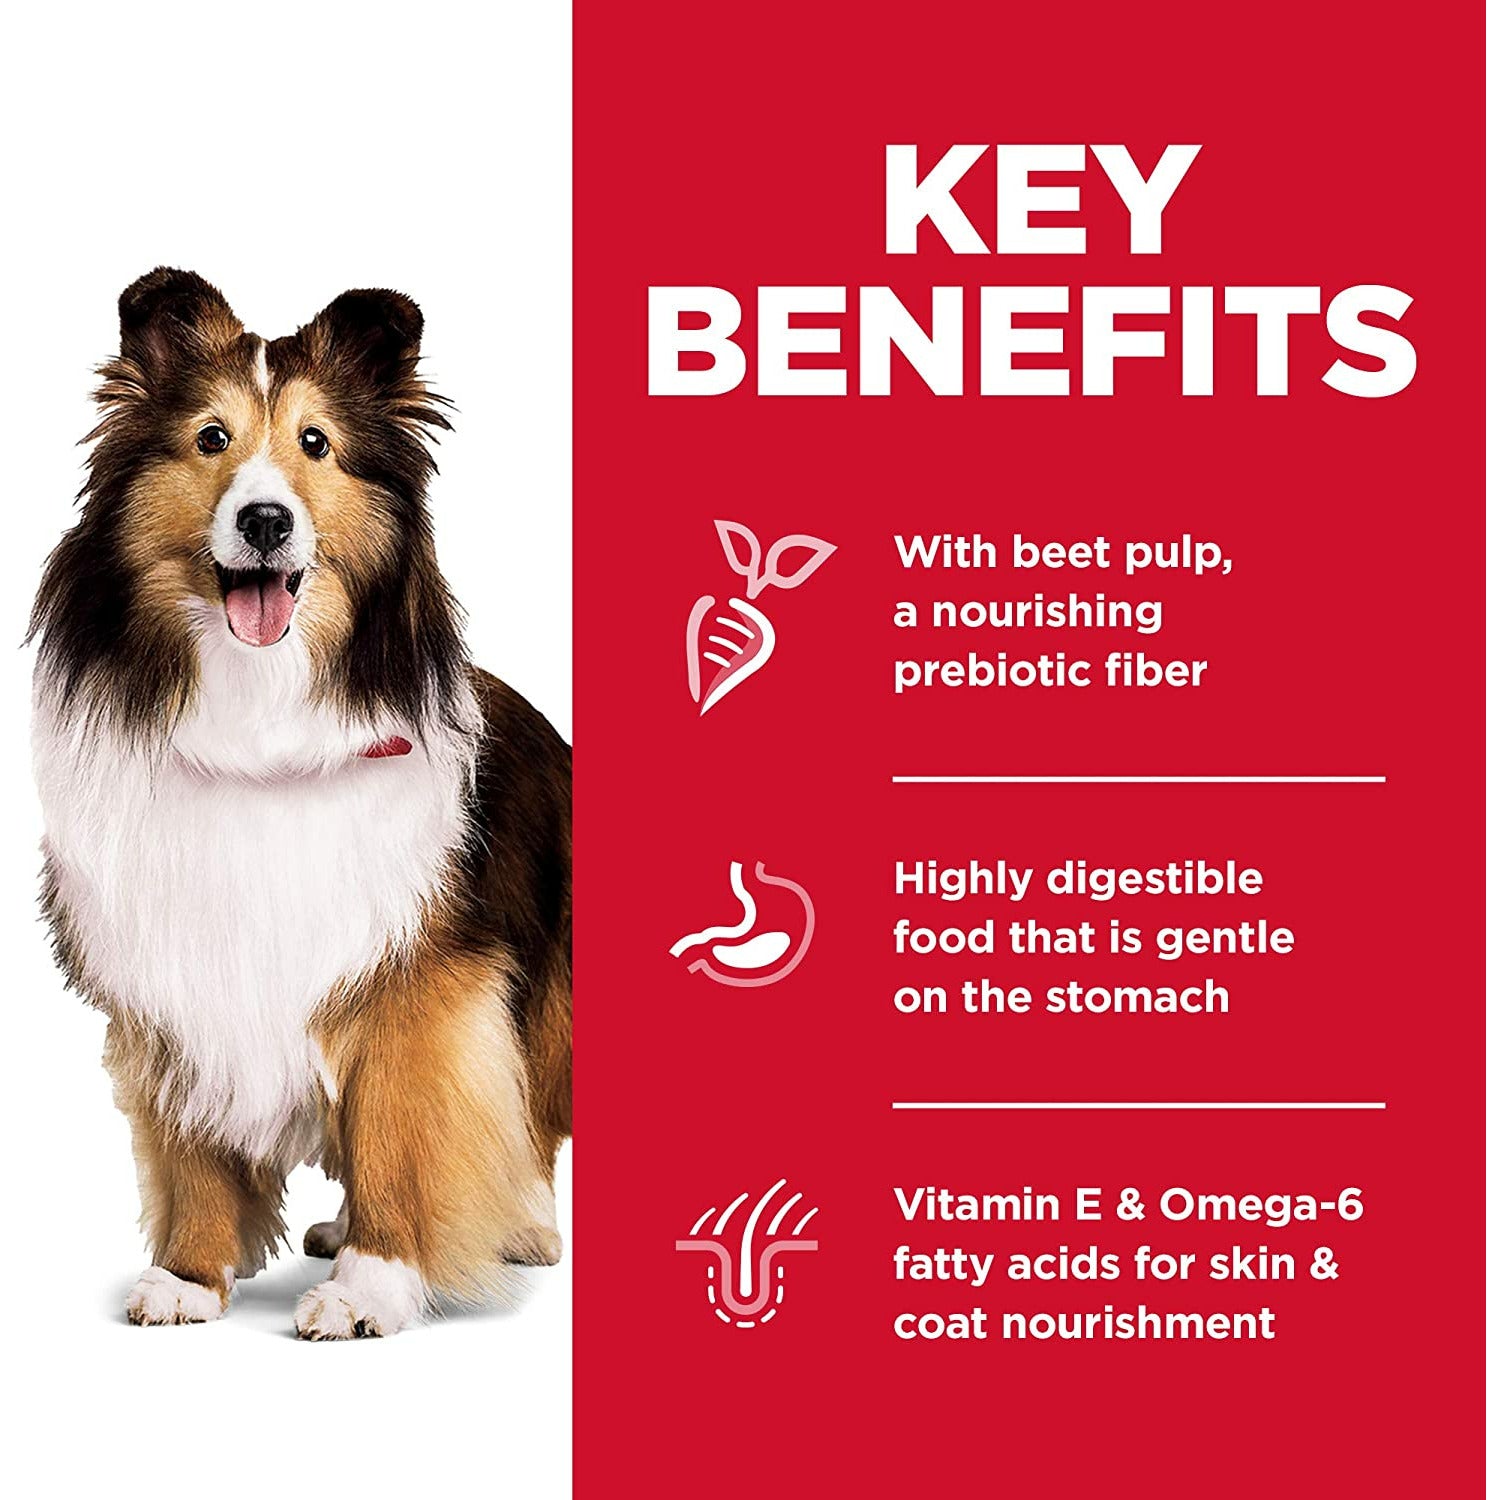 Hill's Science Diet Dry Dog Food, Adult, Sensitive Stomach & Skin Recipes  Dog Food  | PetMax Canada